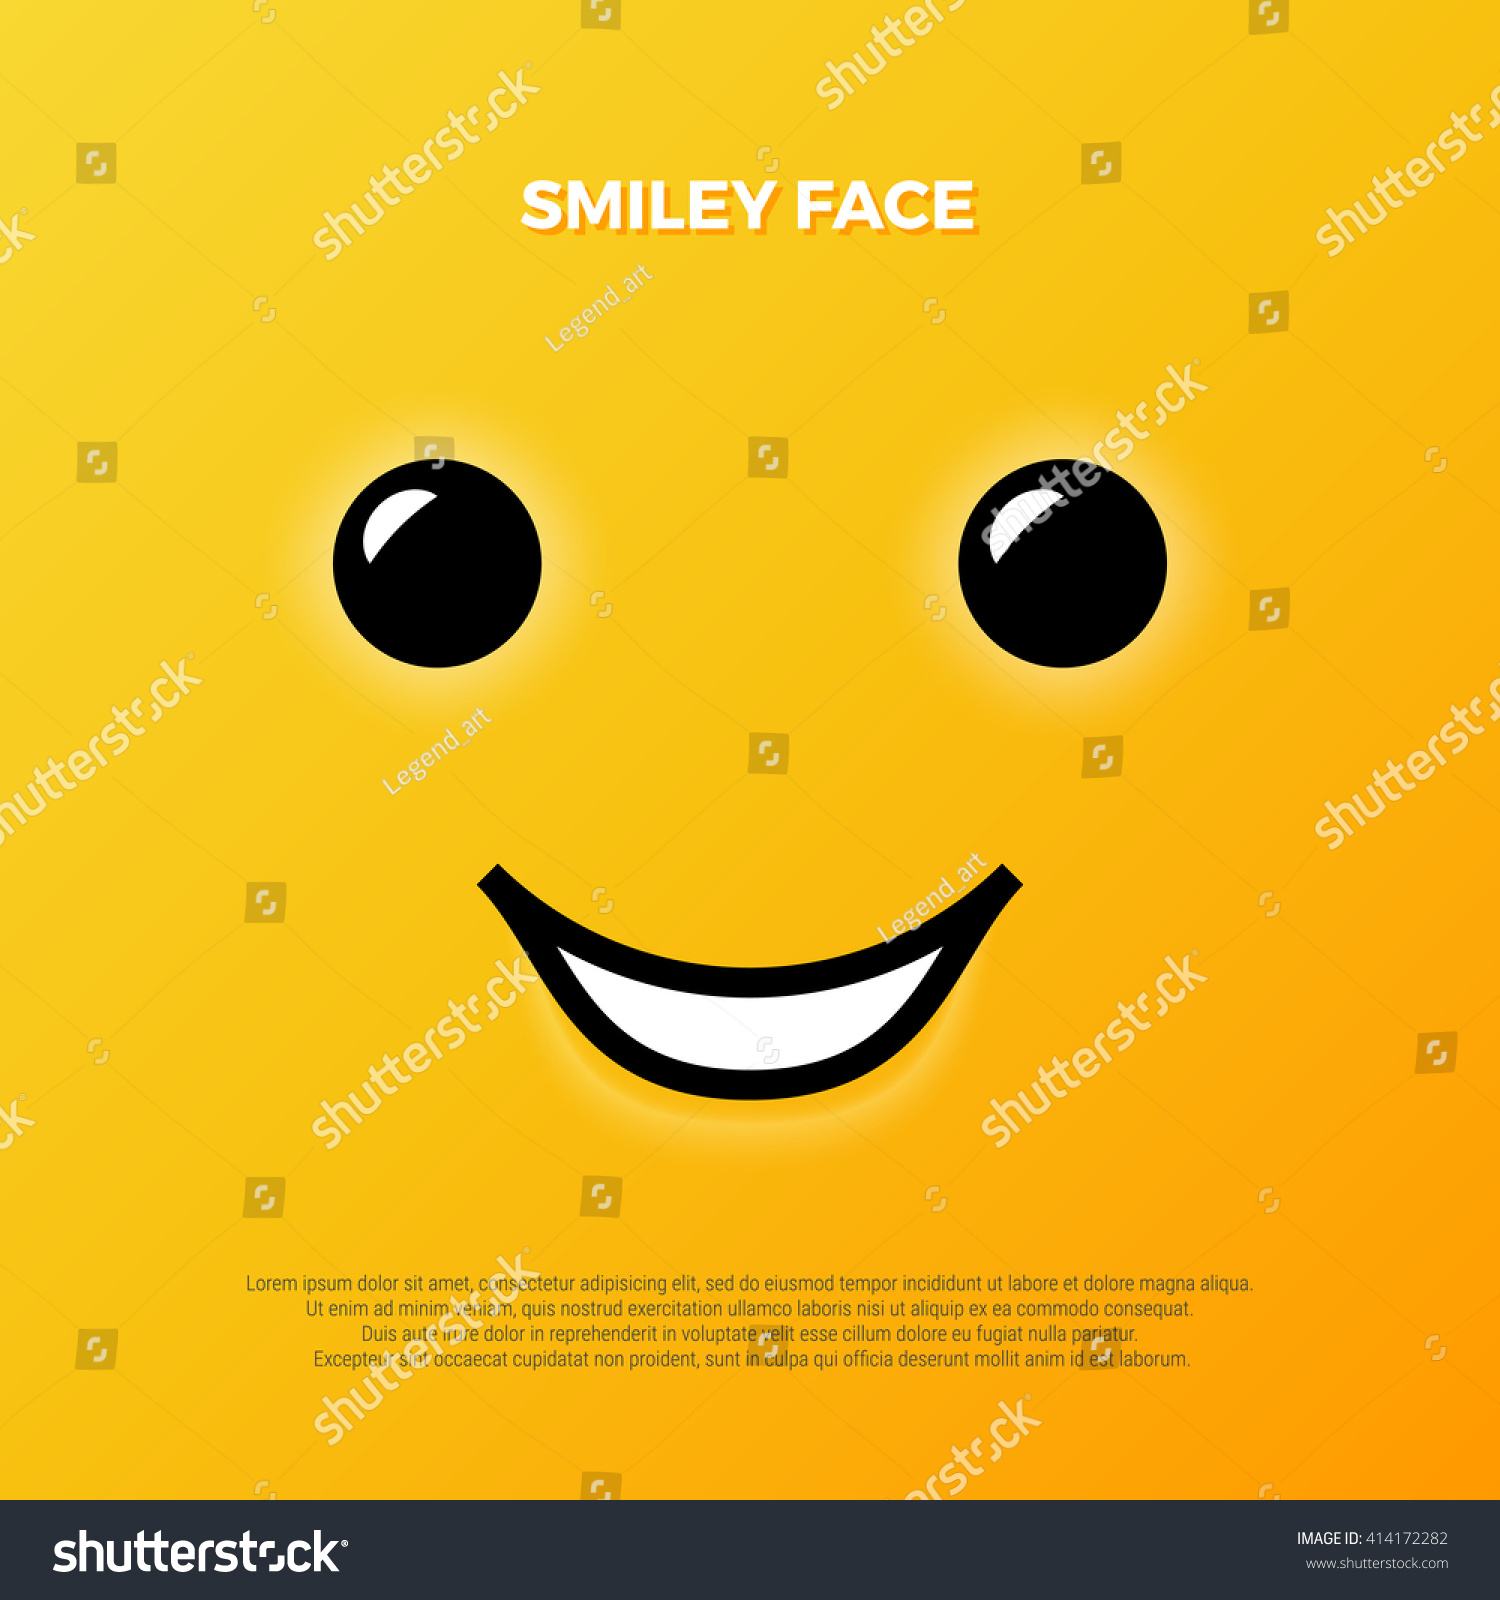 Smiley Face Yellow Smile Poster World Stock Vector Royalty